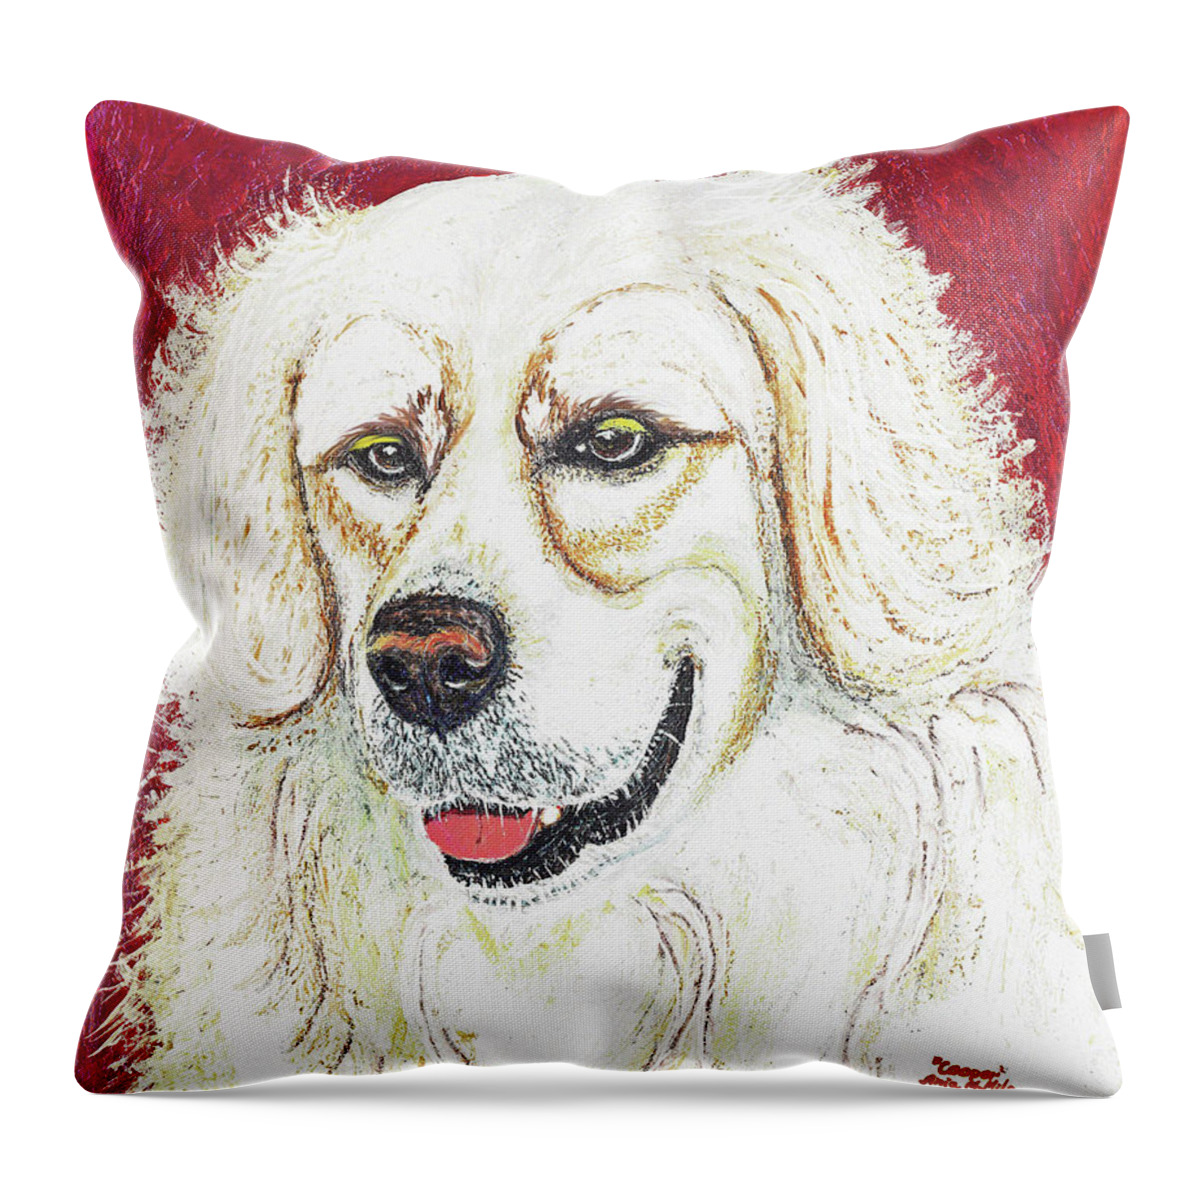 British Golden Retriever Throw Pillow featuring the painting Cooper II by Ania M Milo